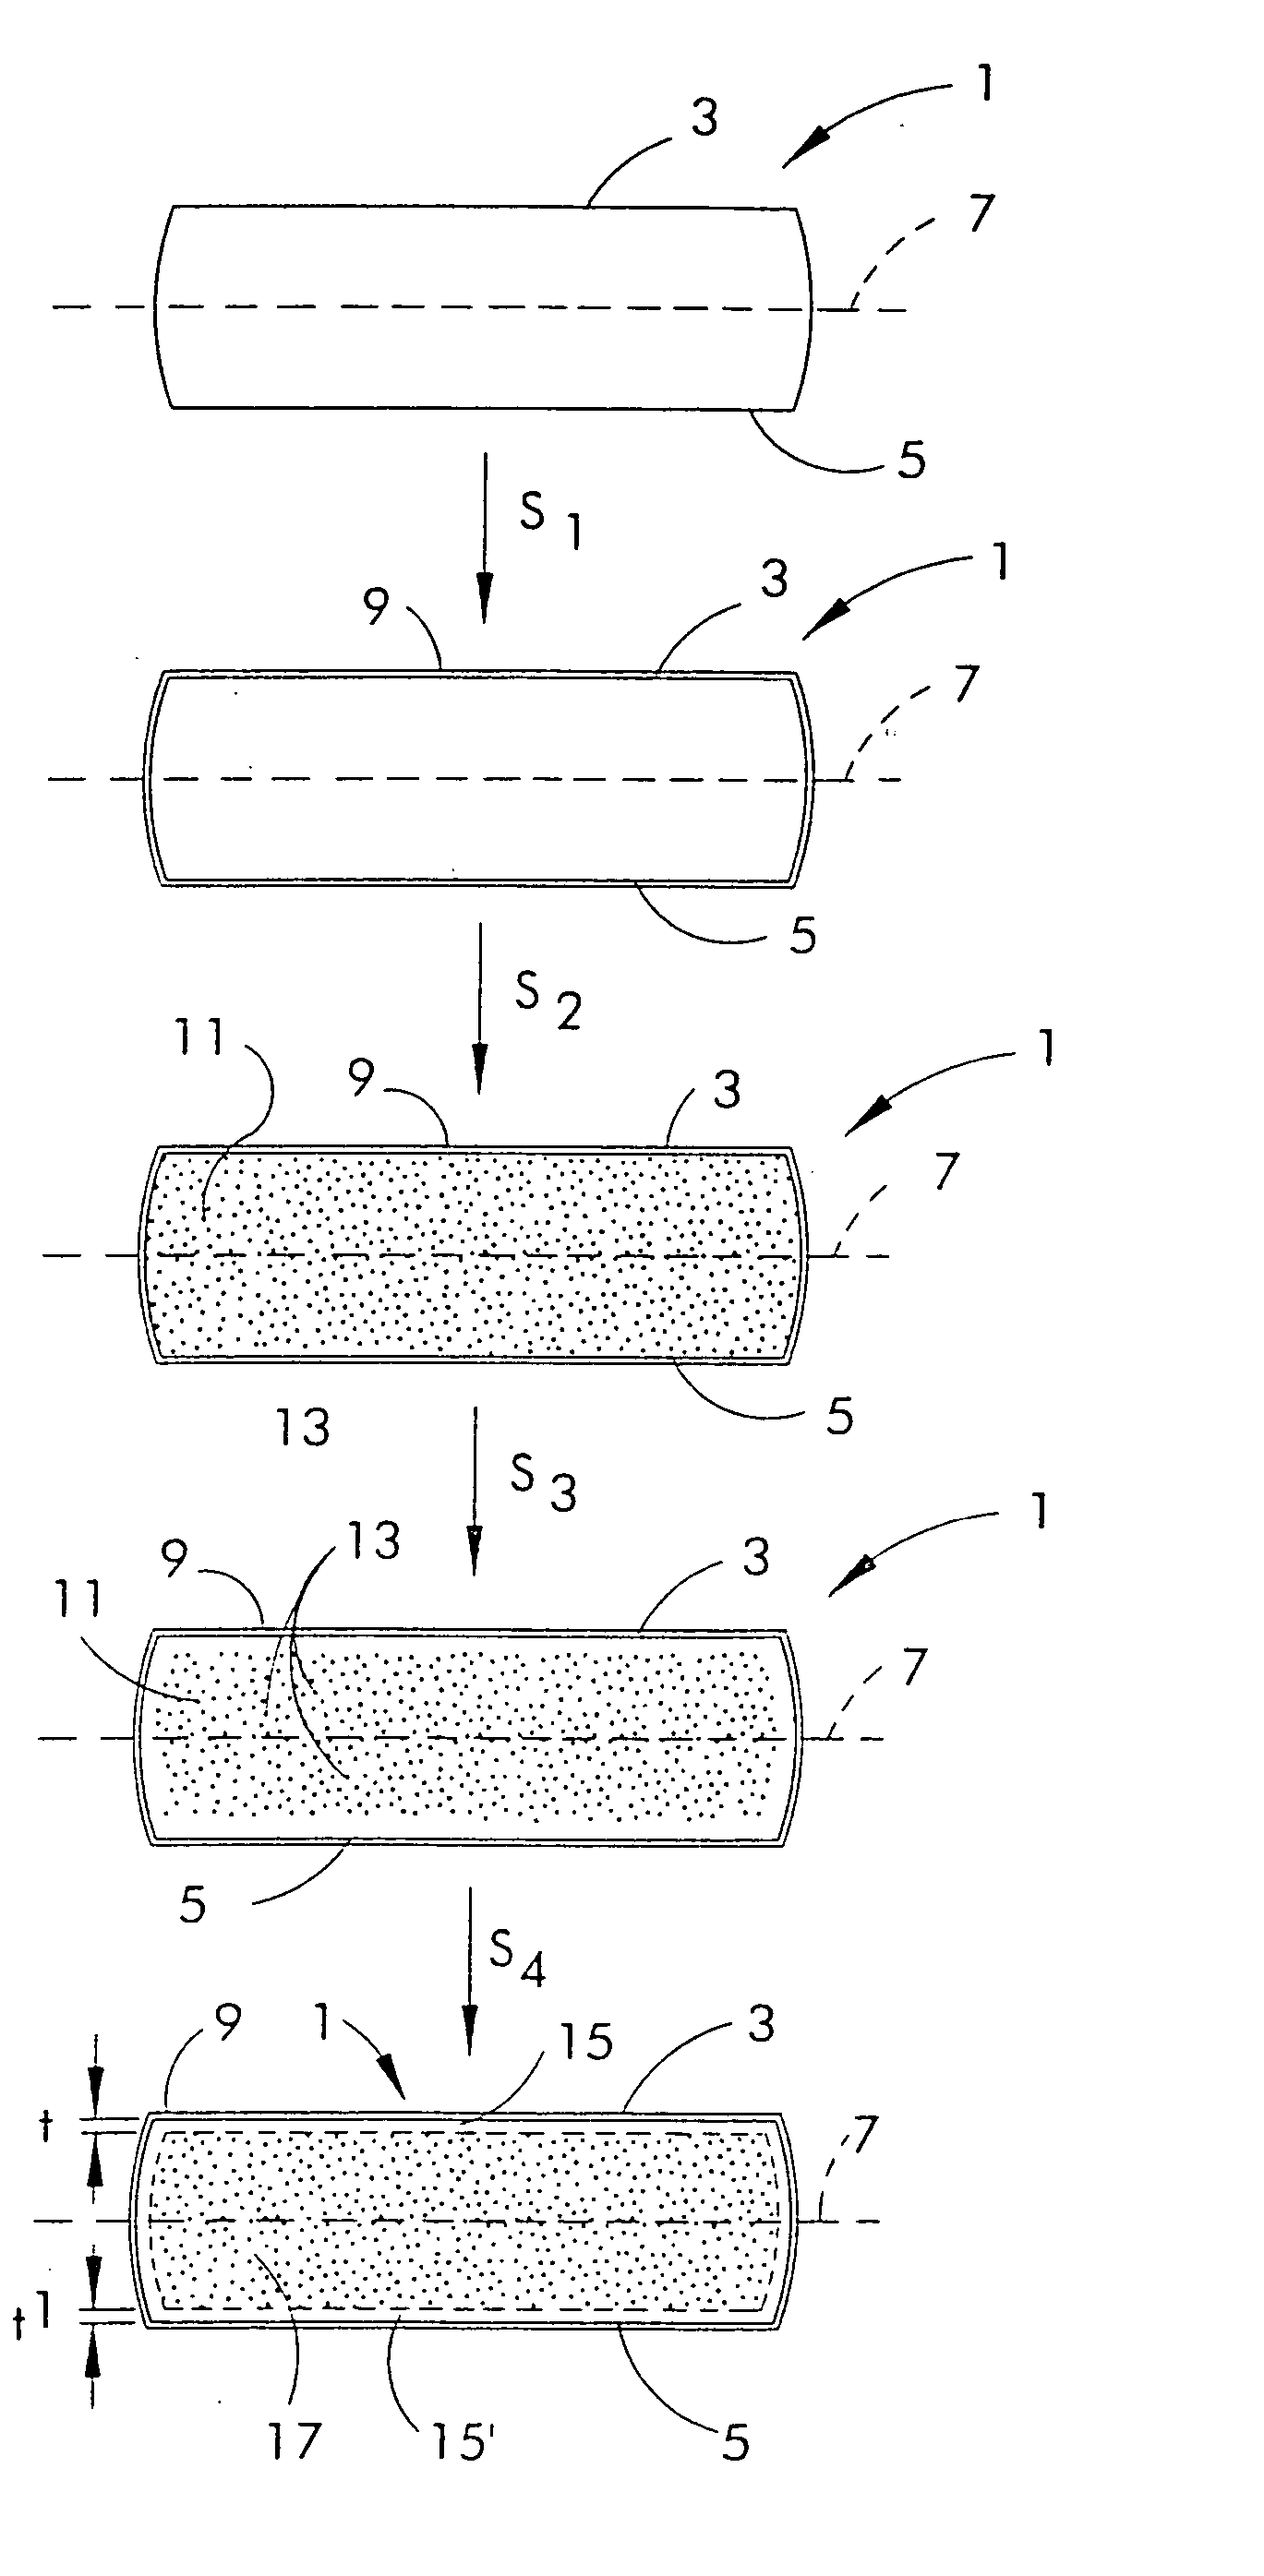 Process for implementing oxygen into a silicon wafer having a region which is free of agglomerated intrinsic point defects